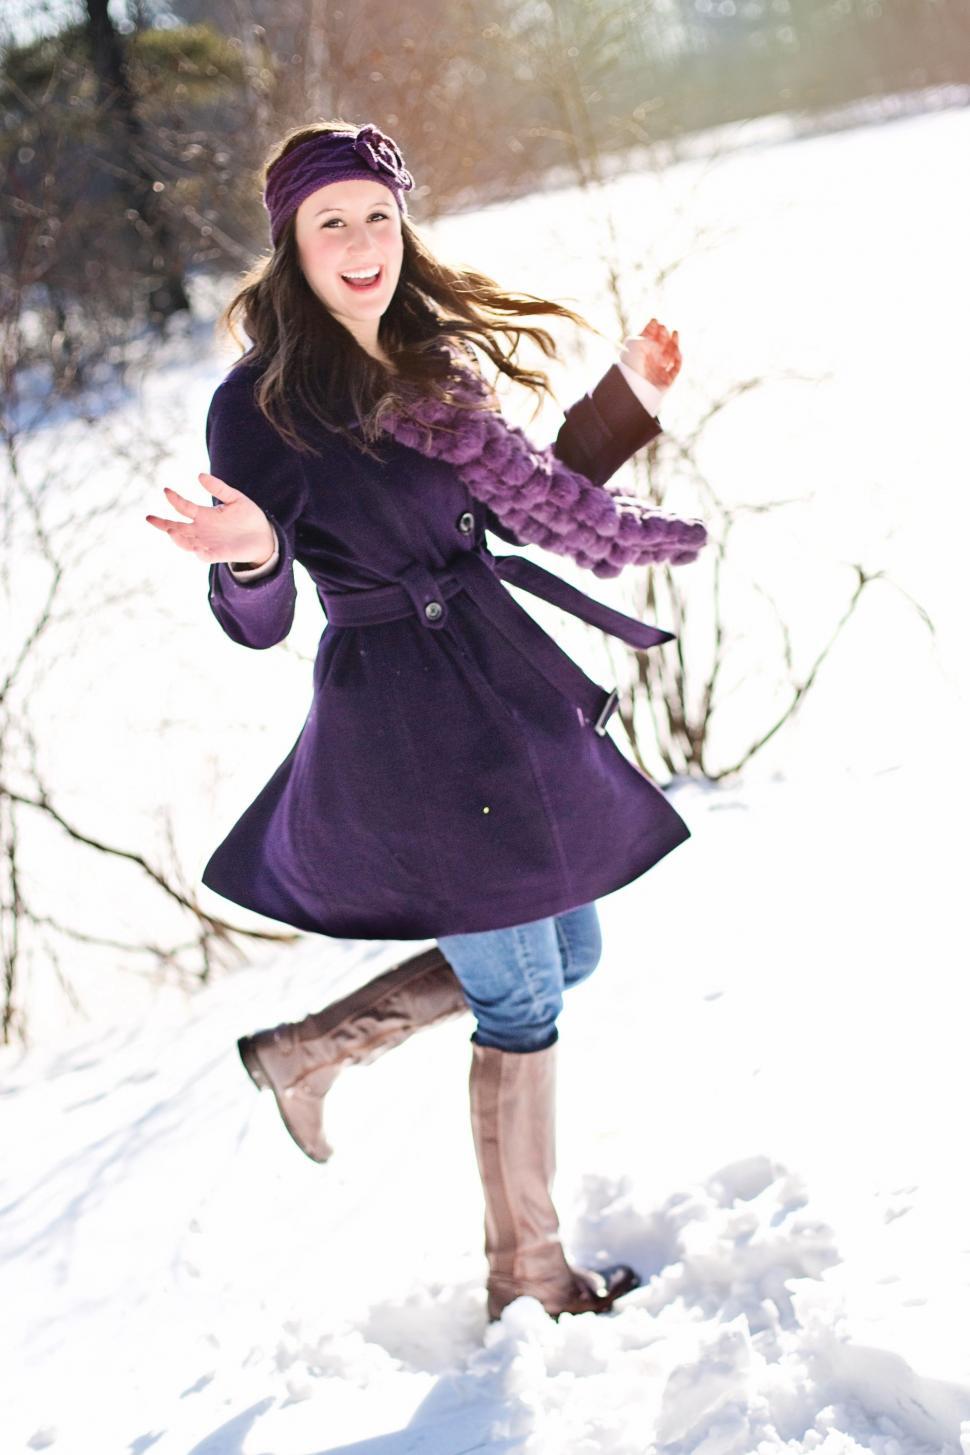 Free Image of Smiling Young Woman in Purple Winter Coat in Snow 